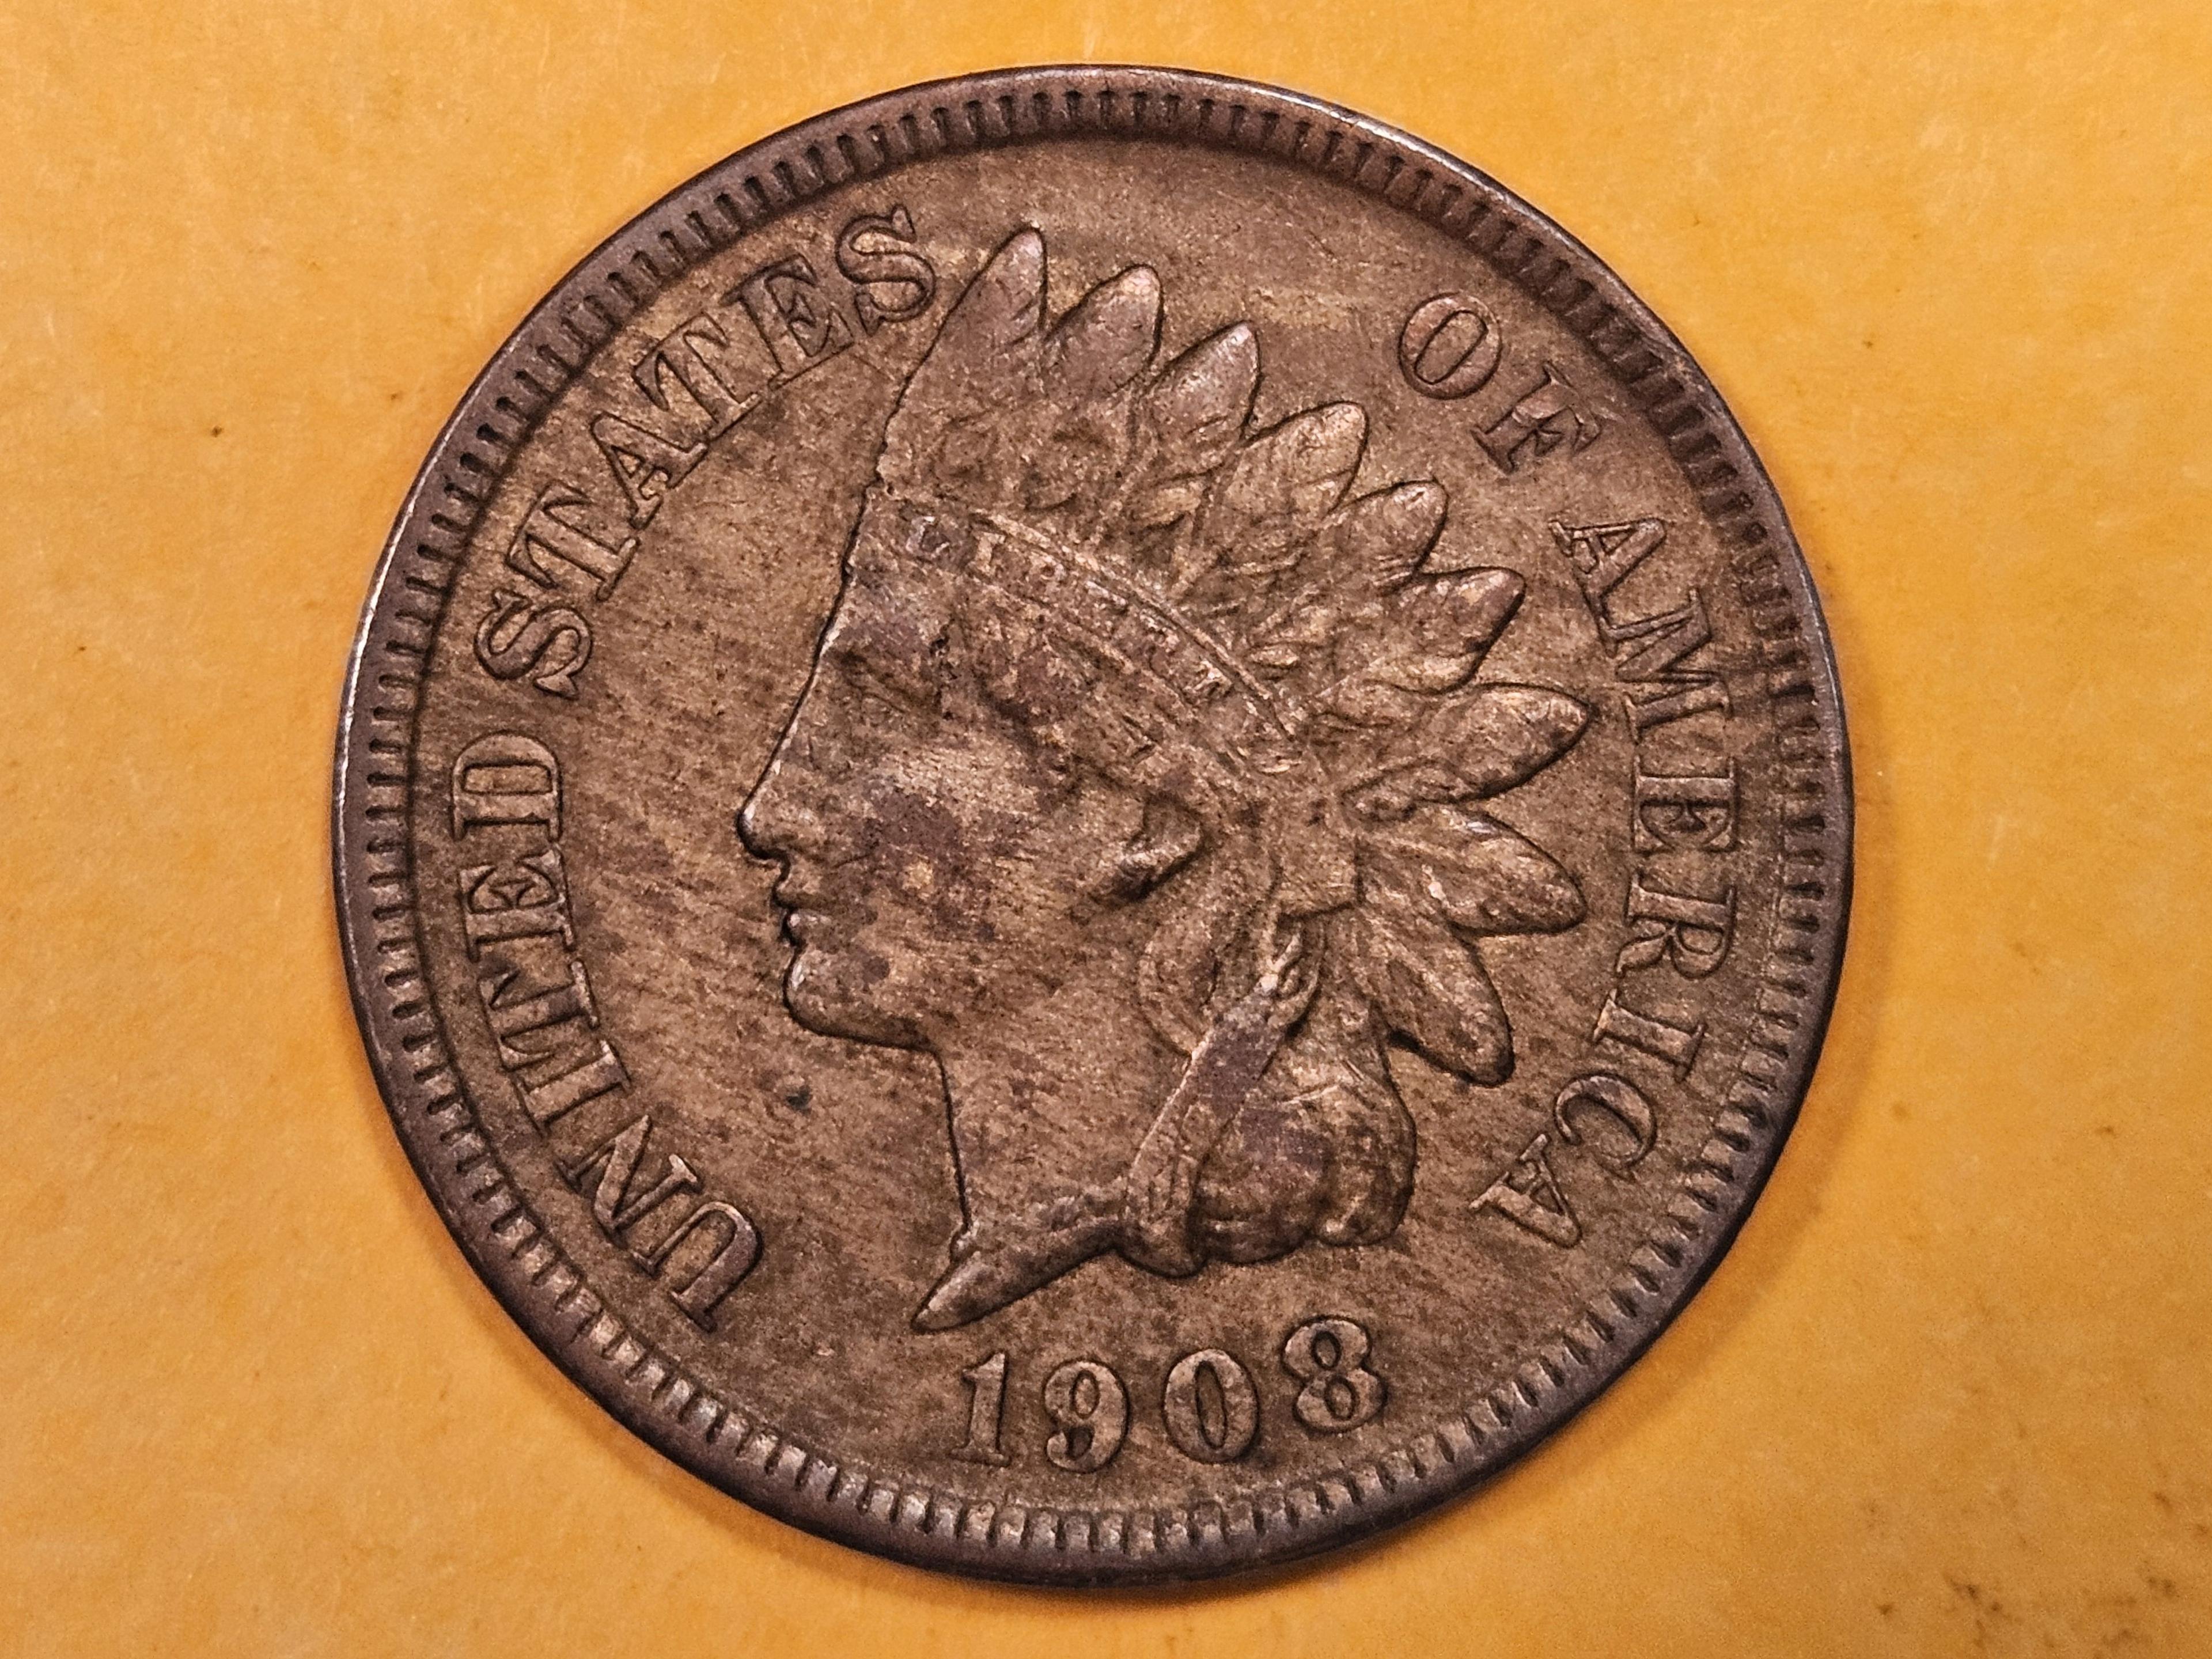 * Semi-key 1908-S Indian Cent in Very Fine - 30